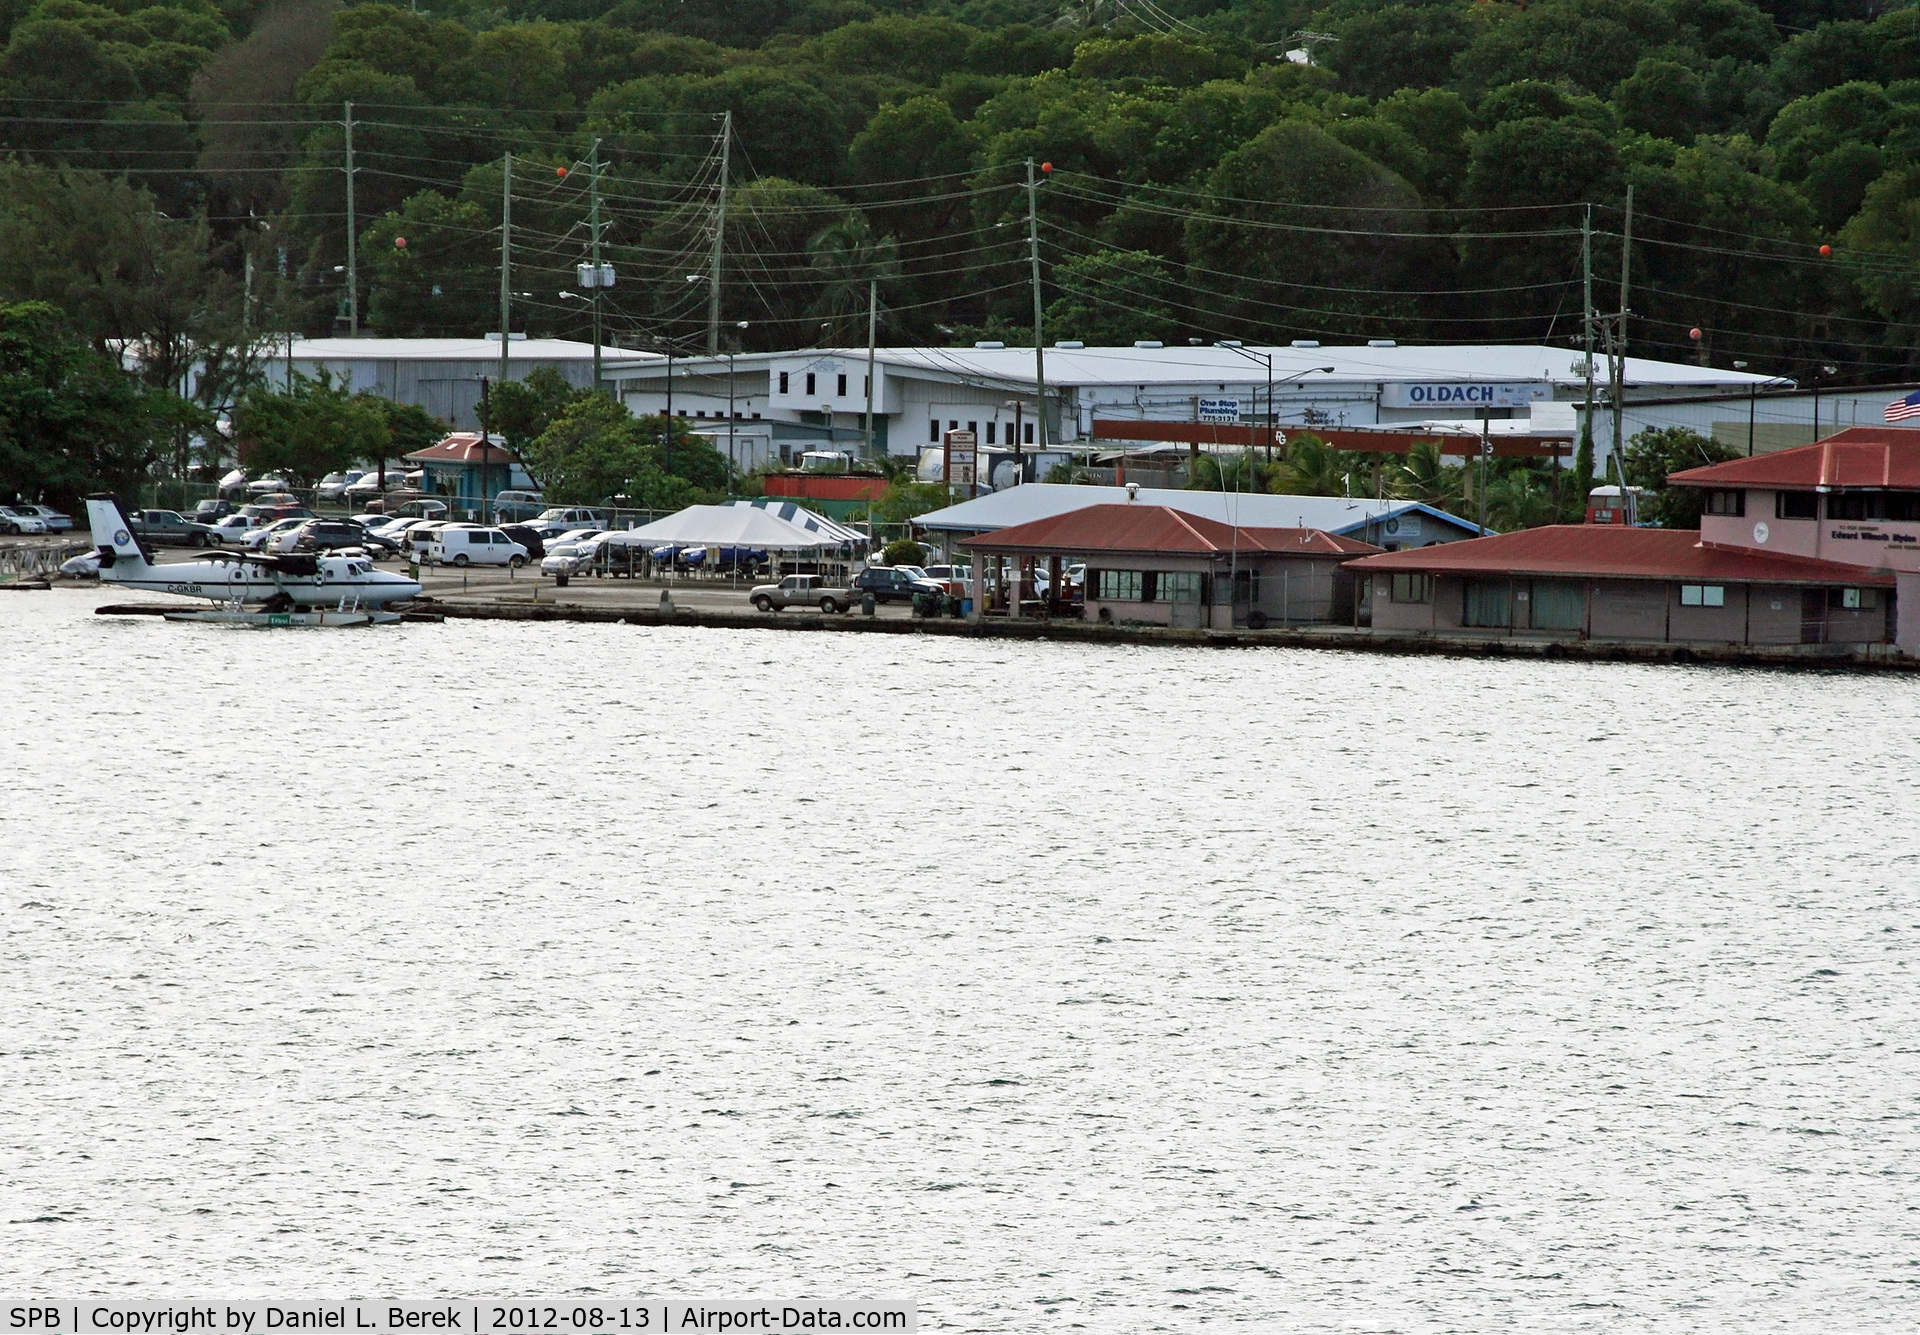 Scappoose Industrial Airpark Airport (SPB) - This seaplane base is located deep within beautiful Charlotte Amalie harbor; the international airport is Cyril E. King Airport.